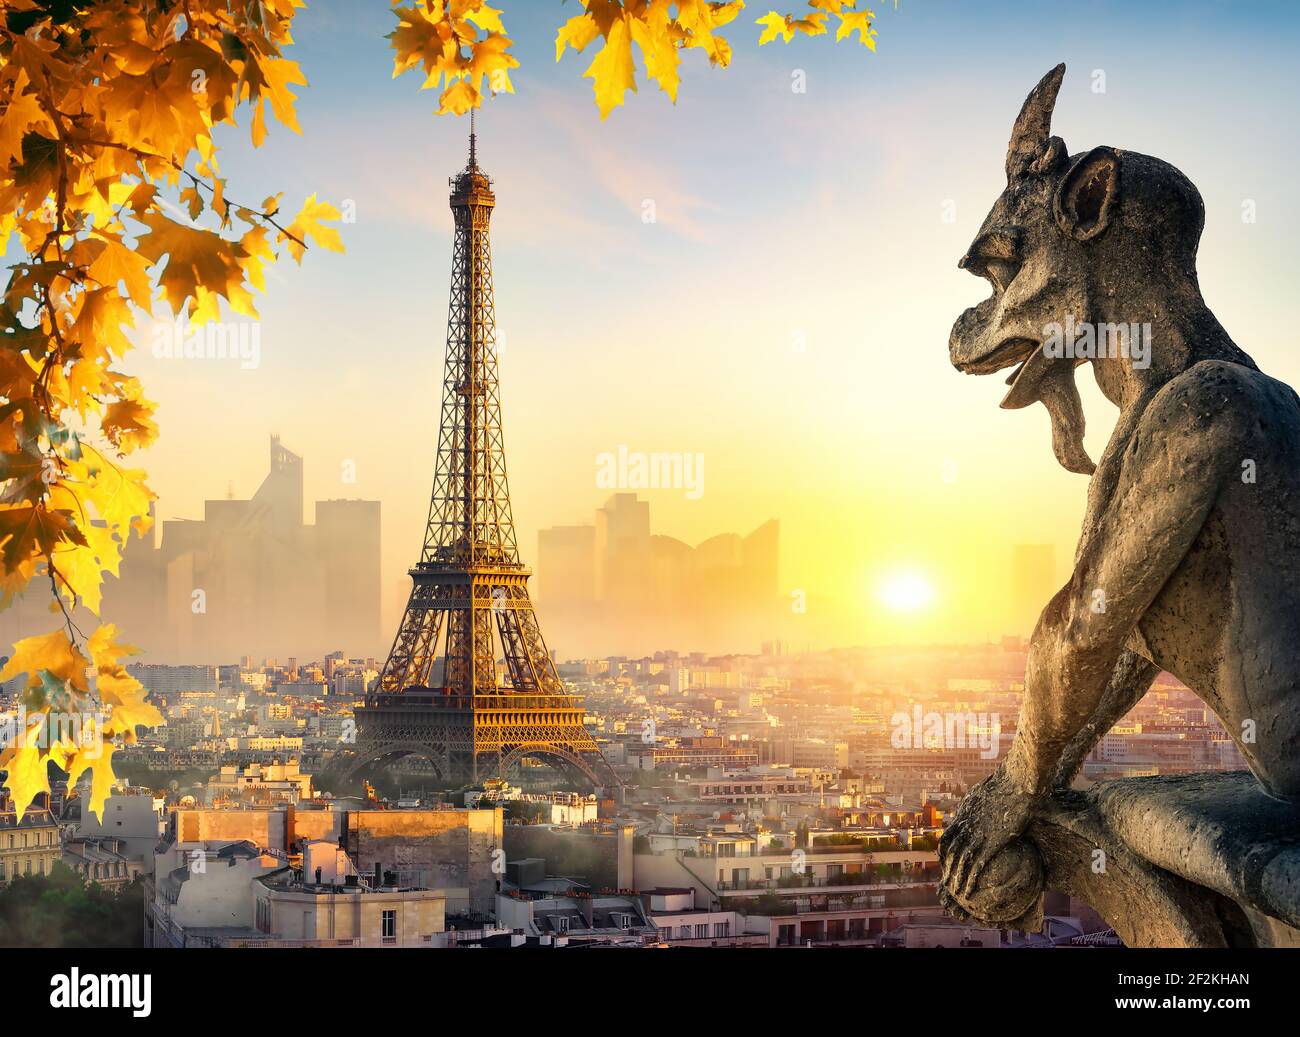 Stone Chimera and Eiffel Tower at sunset in Paris, France Stock Photo